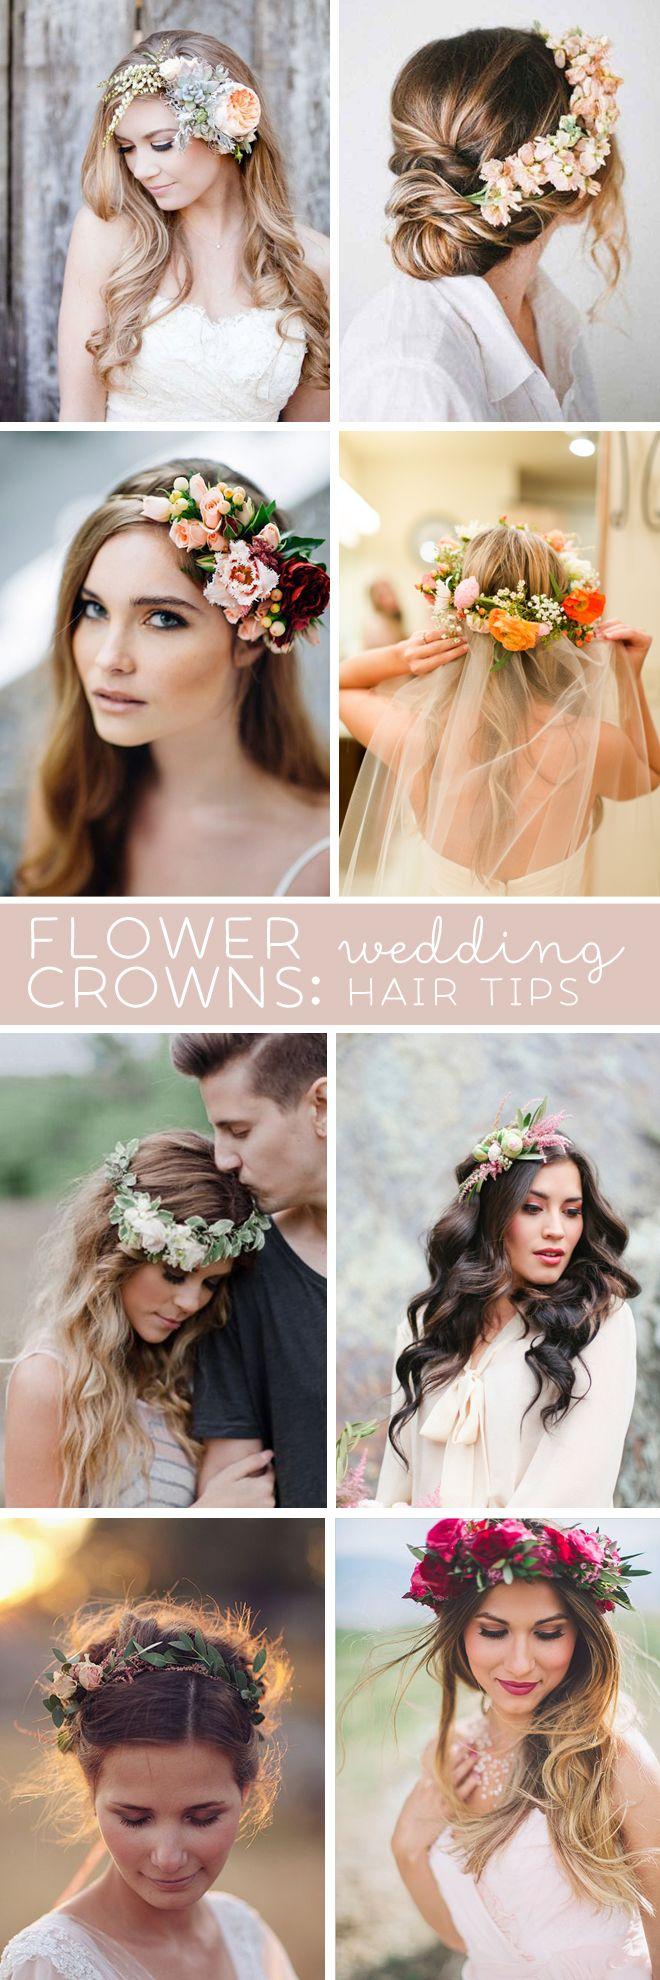 Mariage - Awesome Wedding Hair Tips For Wearing Flower Crowns!